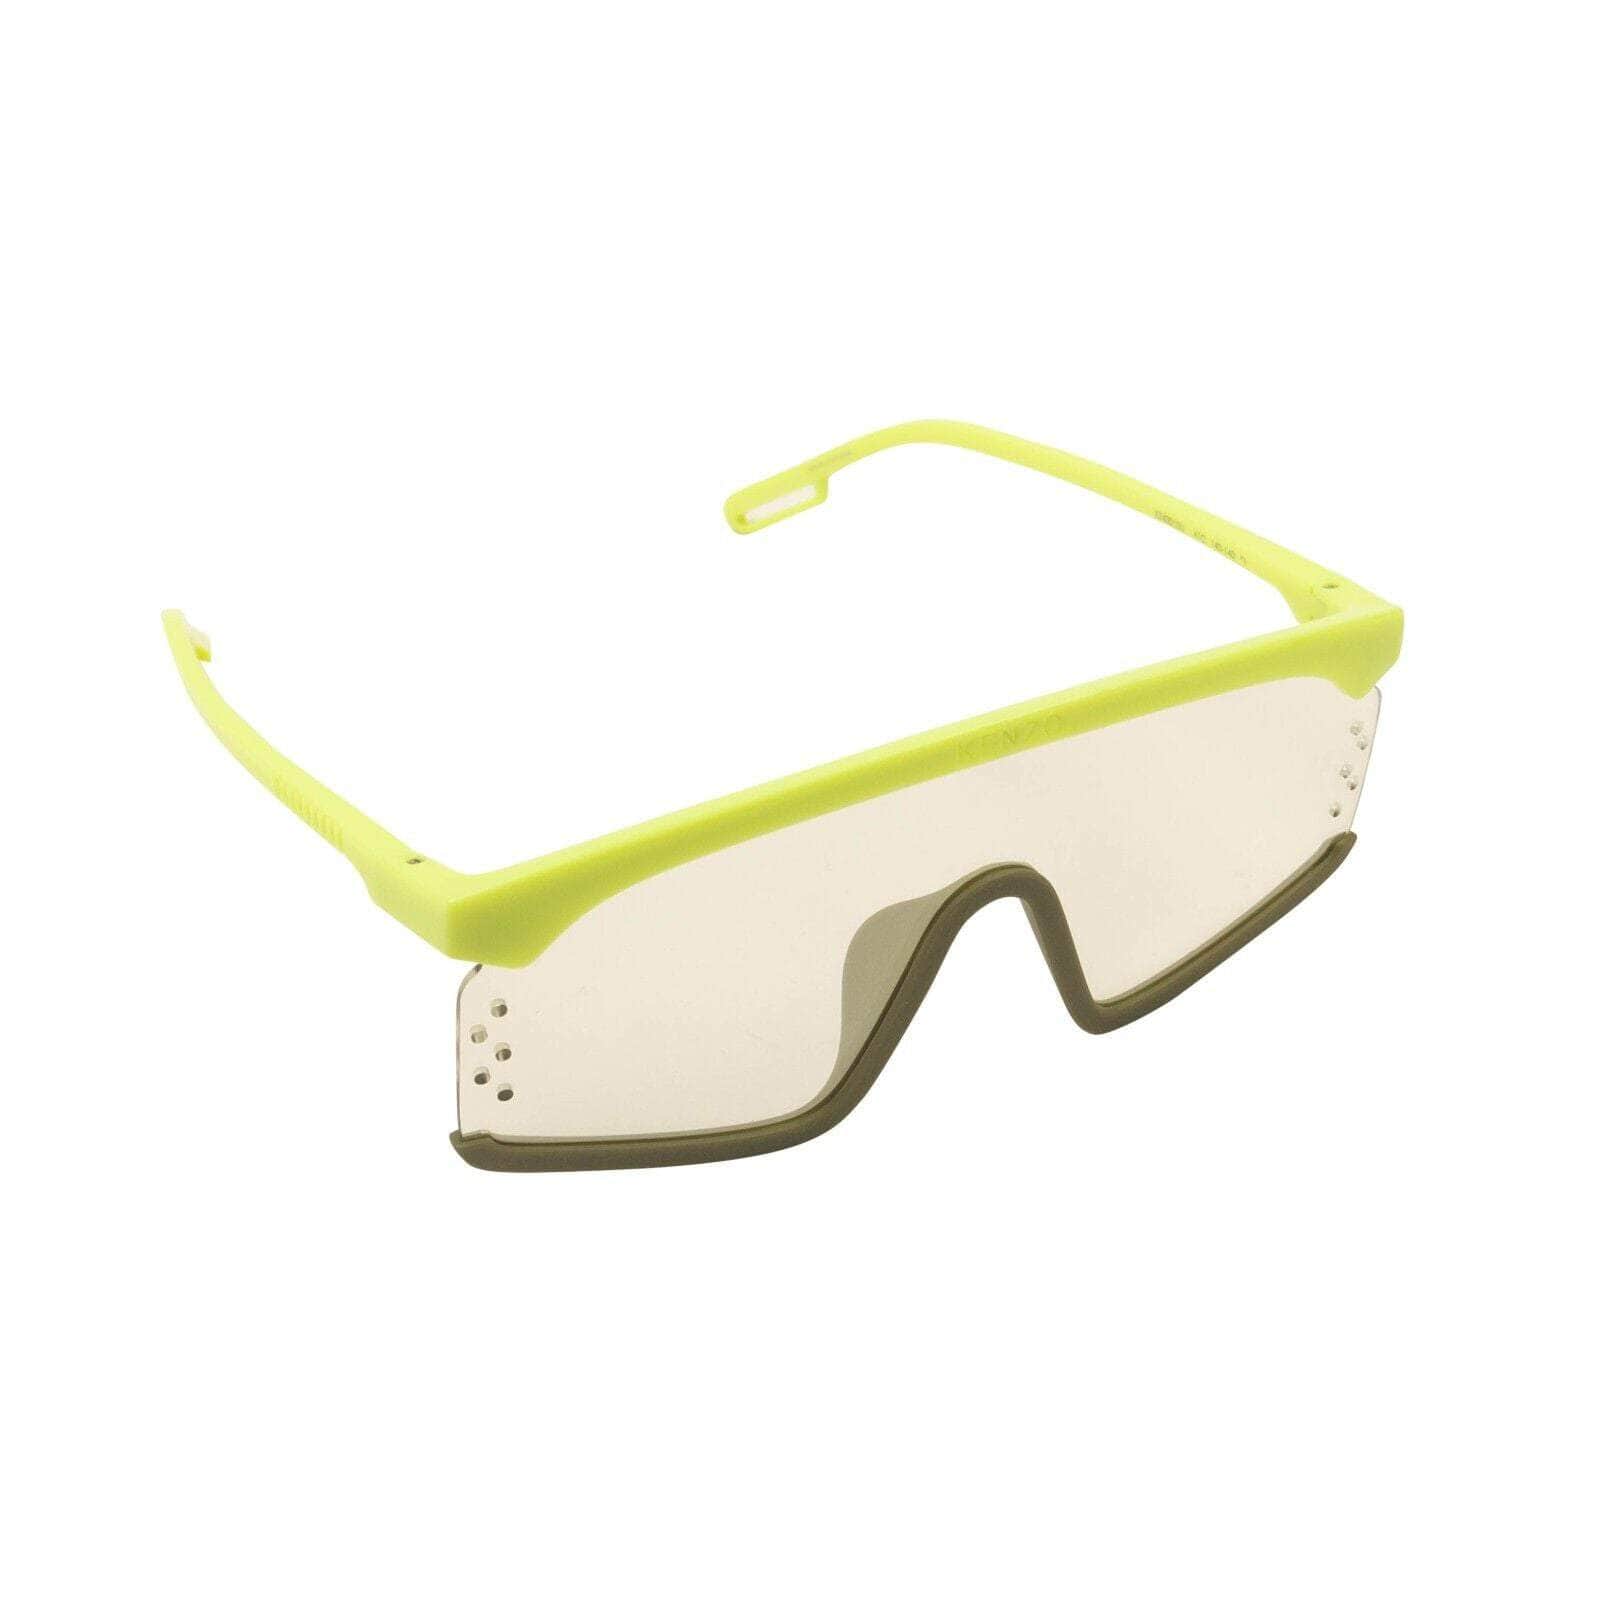 Kenzo Paris channelenable-all, chicmi, couponcollection, gender-mens, gender-womens, kenzo-paris, main-accessories, mens-shoes, size-os, under-250, unisex-eyewear OS Yellow Smoke Mirror Mask Sunglasses 95-KNZ-3022/OS 95-KNZ-3022/OS